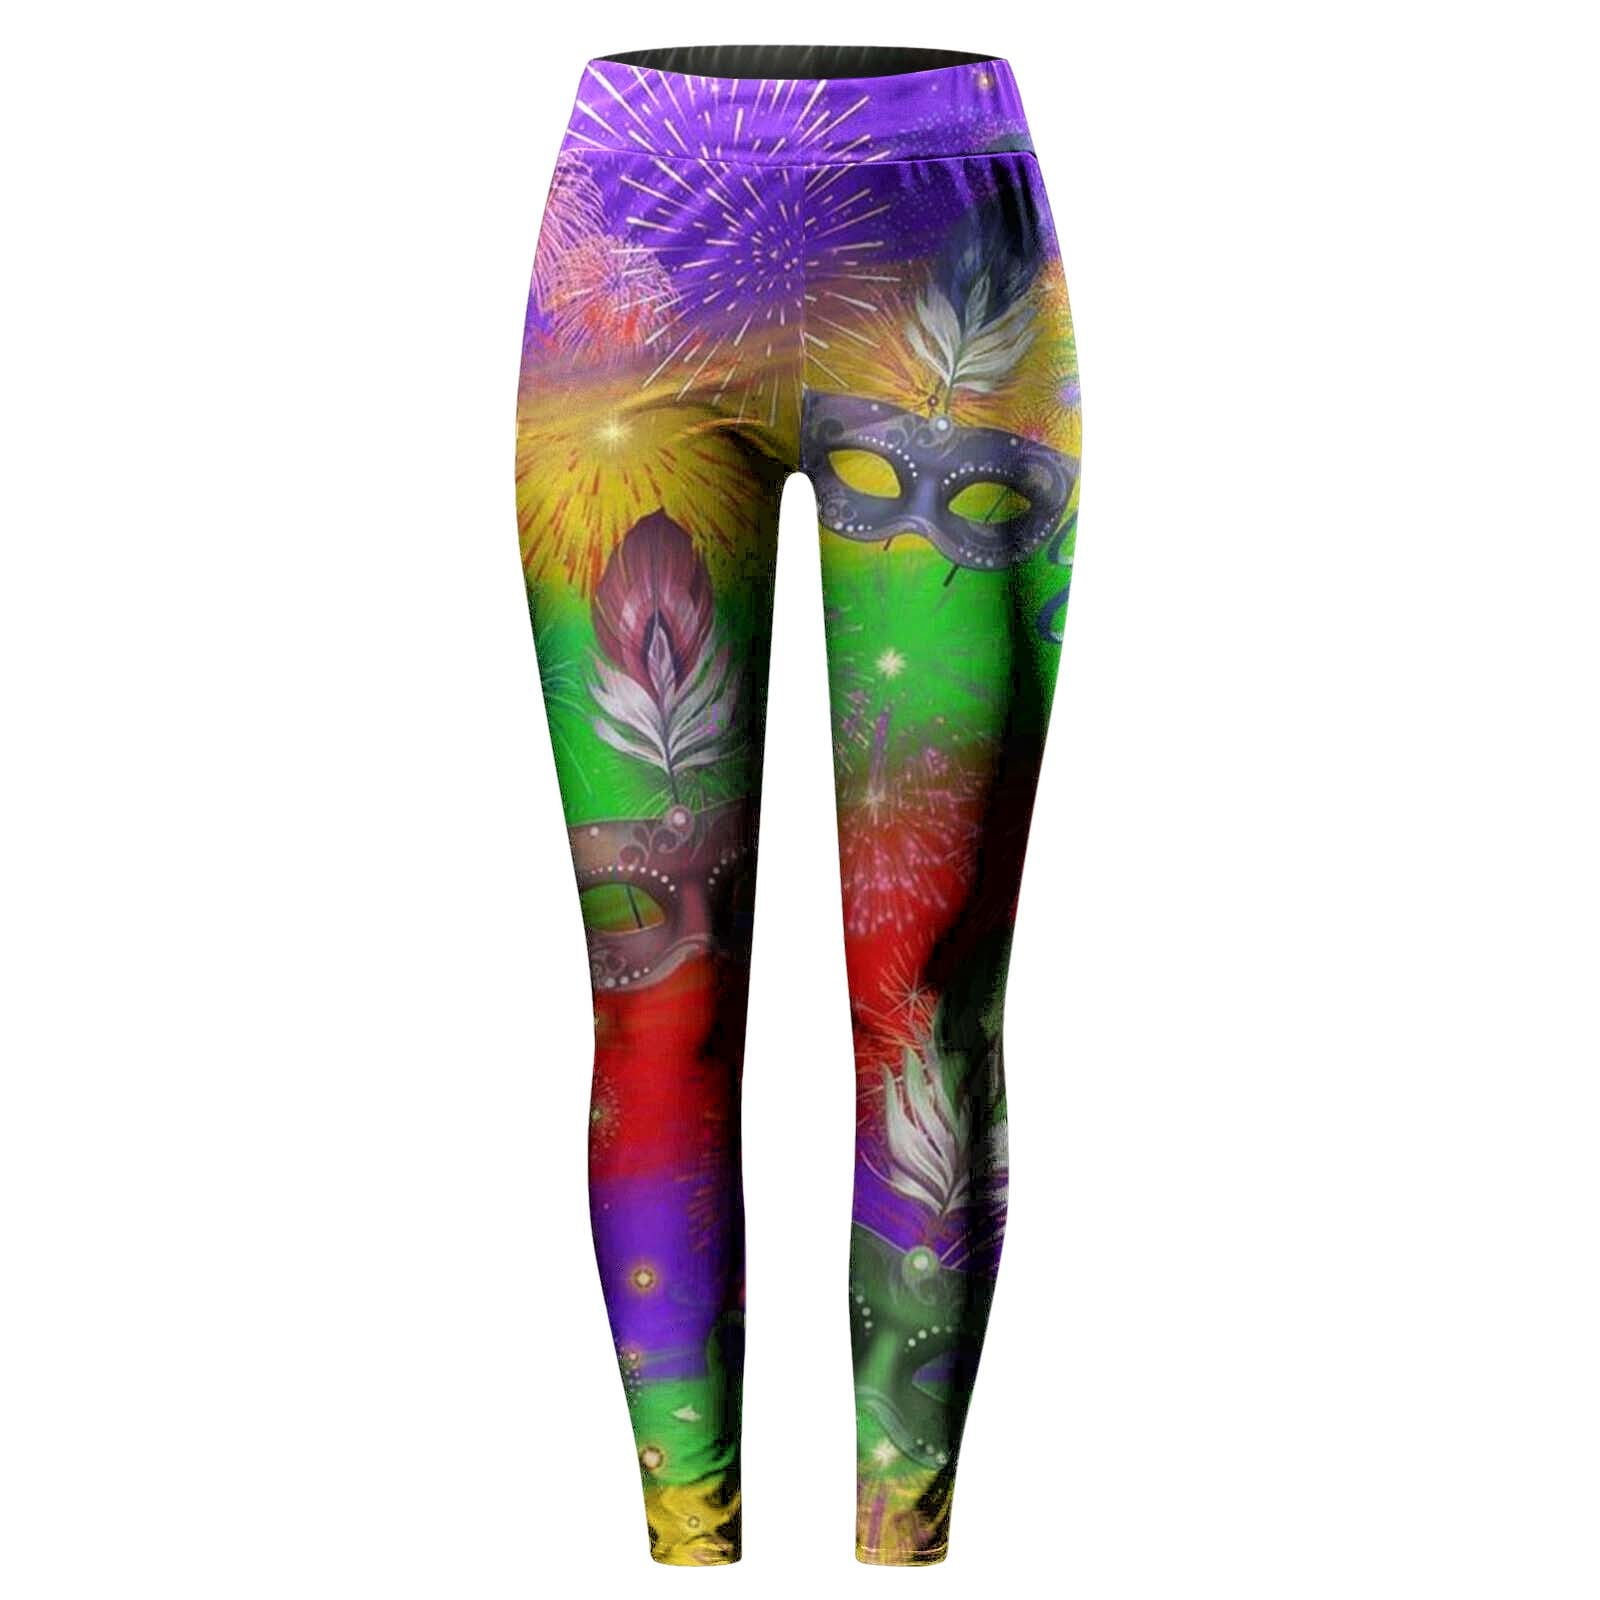  Rvidbe Women's Mardi Gras Leggings, Mardi Gras Outfit for Women  High Waist Stretchy Graphic Yoga Pants Casual Carnival Workout Running  Mardi Gras Outfit Mardi Gras Leggings for Women Black : Clothing